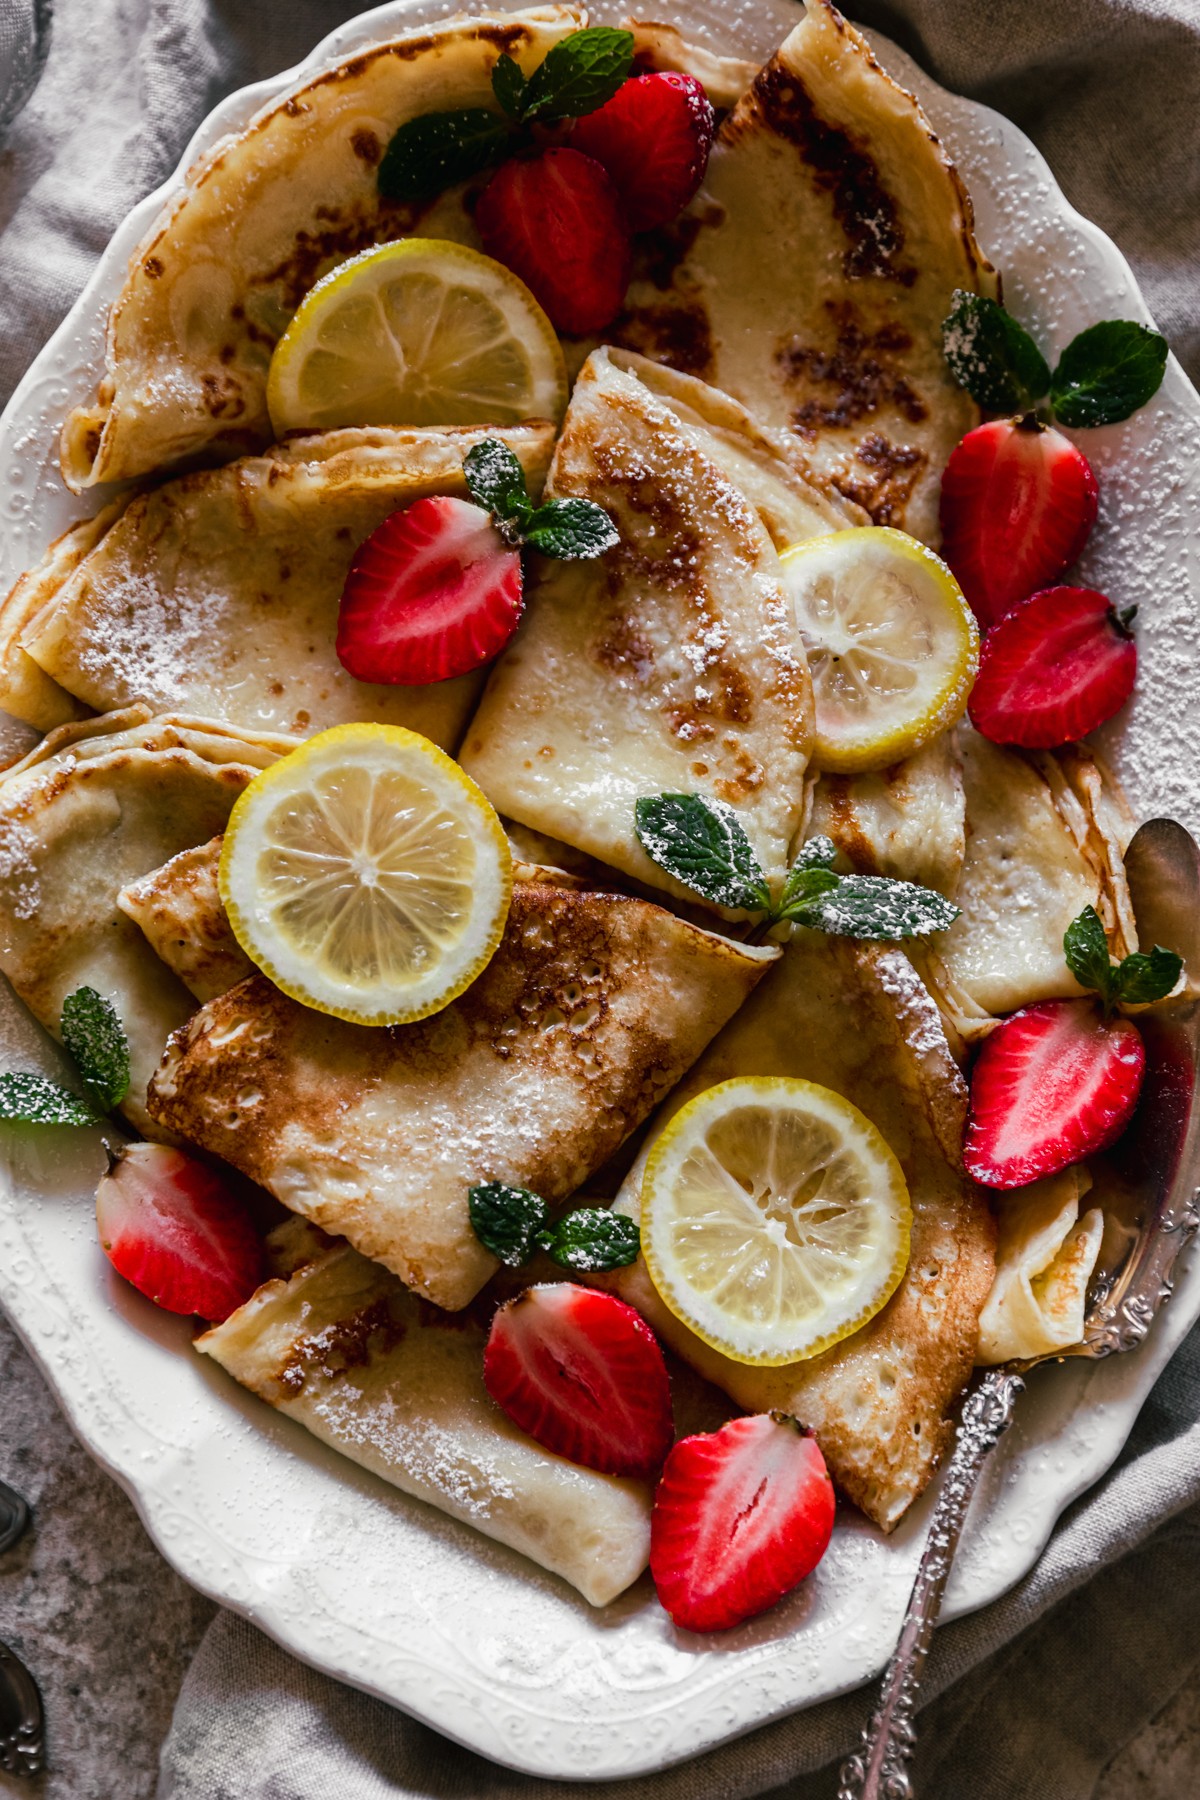 A very closeup image of Norwegian pancakes with strawberries and lemon slices on a white oval plate with a vintage serving spoon in the right lower corner. The background is a beige linen and tan speckled table.